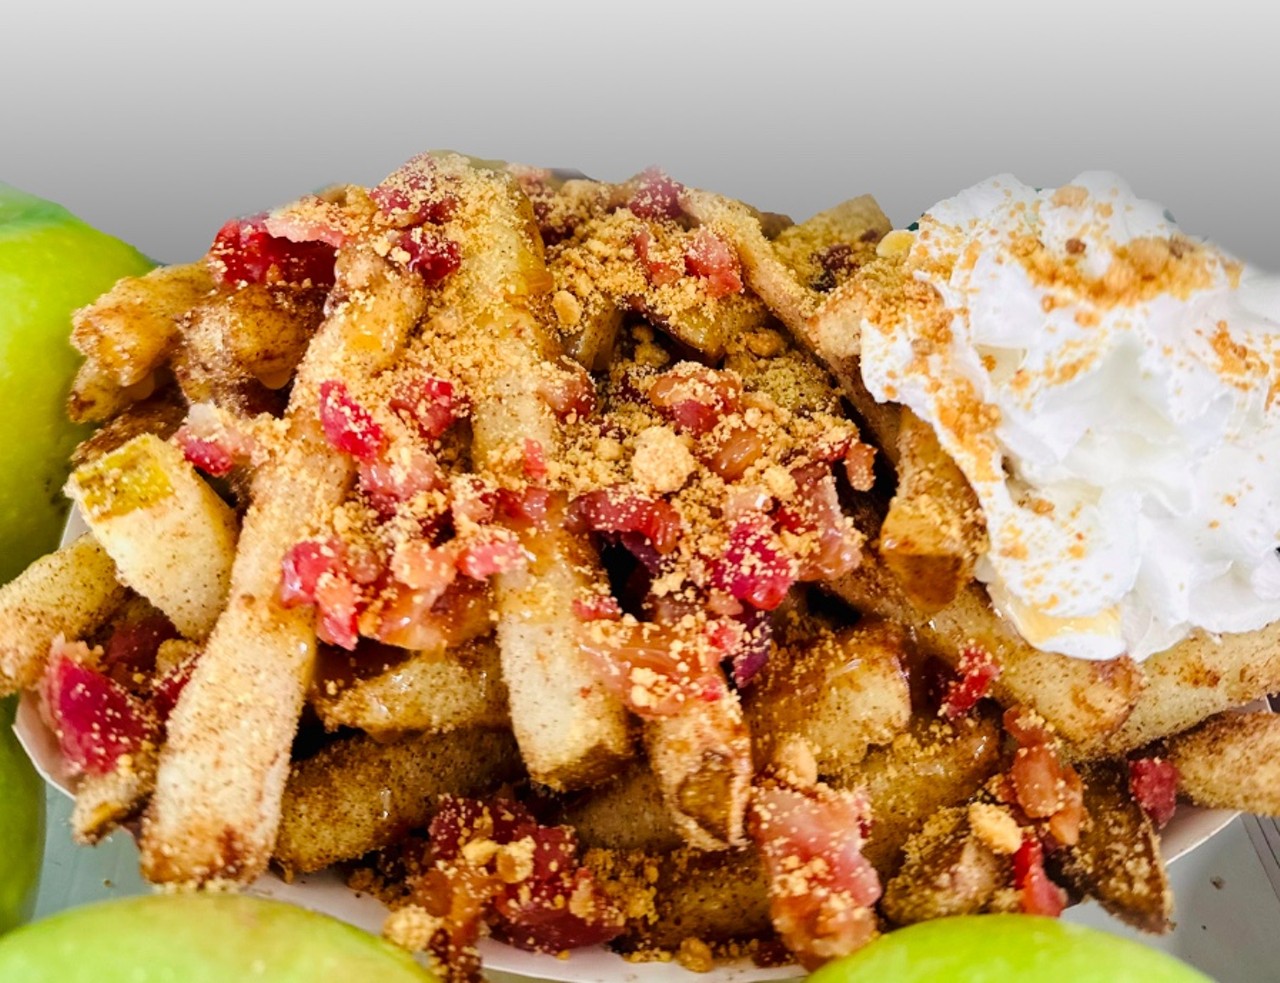 Bacon, Caramel, Peanut Butter Apple Fries
Apple fries topped with crispy bacon, Ghirardelli caramel and peanut butter powder. Fairgoers have the option of adding ice cream.
Location: Apple Fries